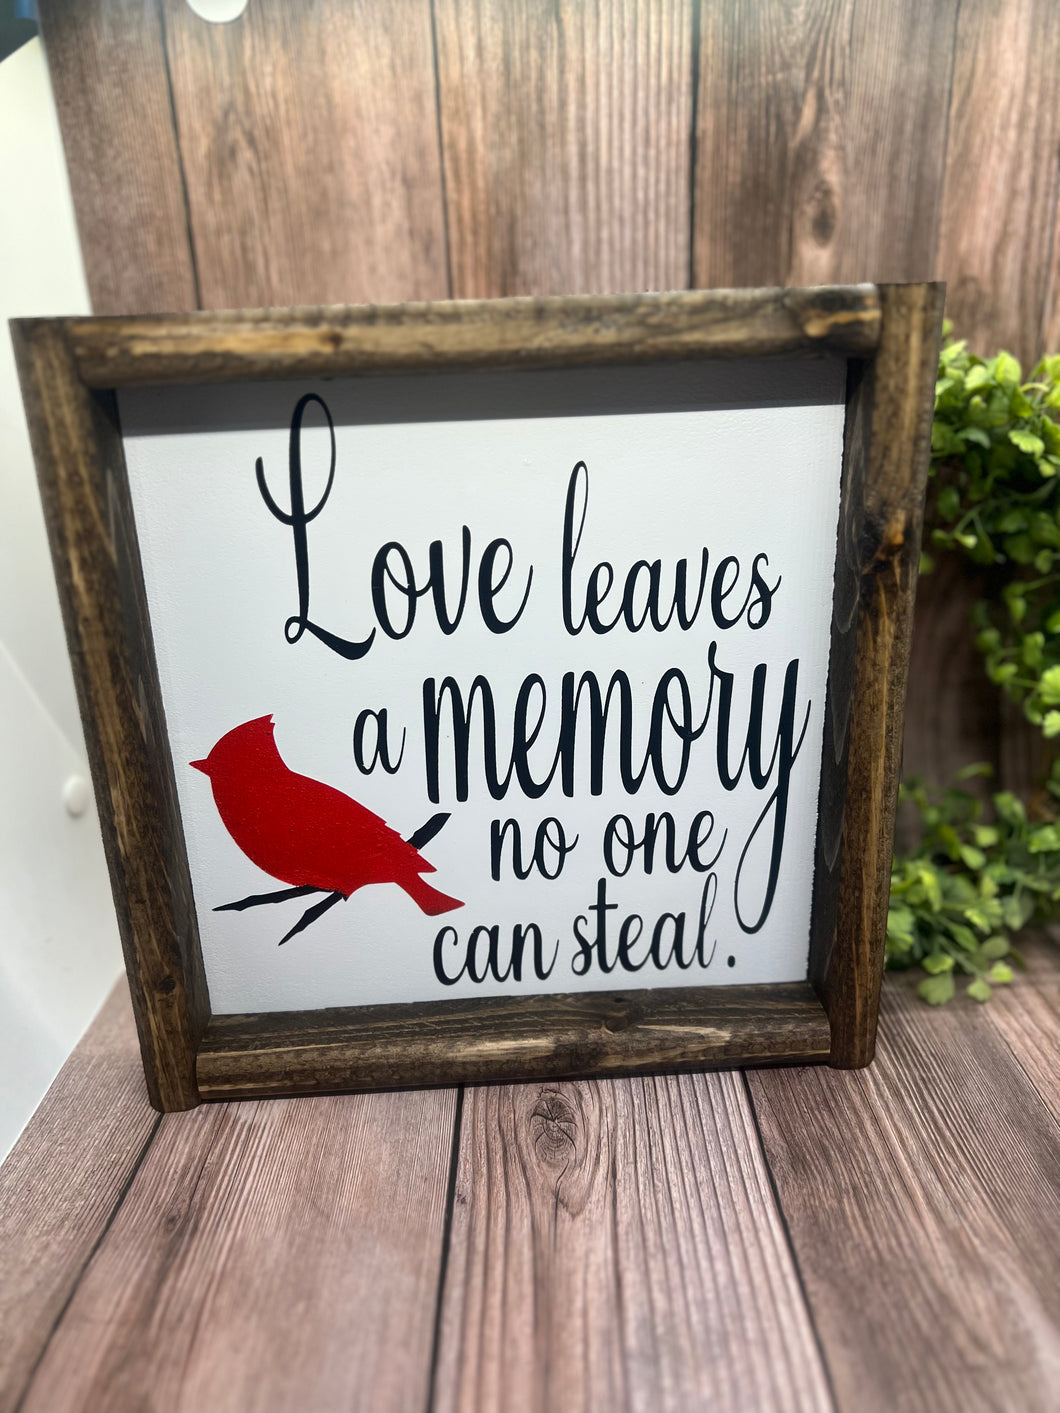 Love leaves a memory no one can steal